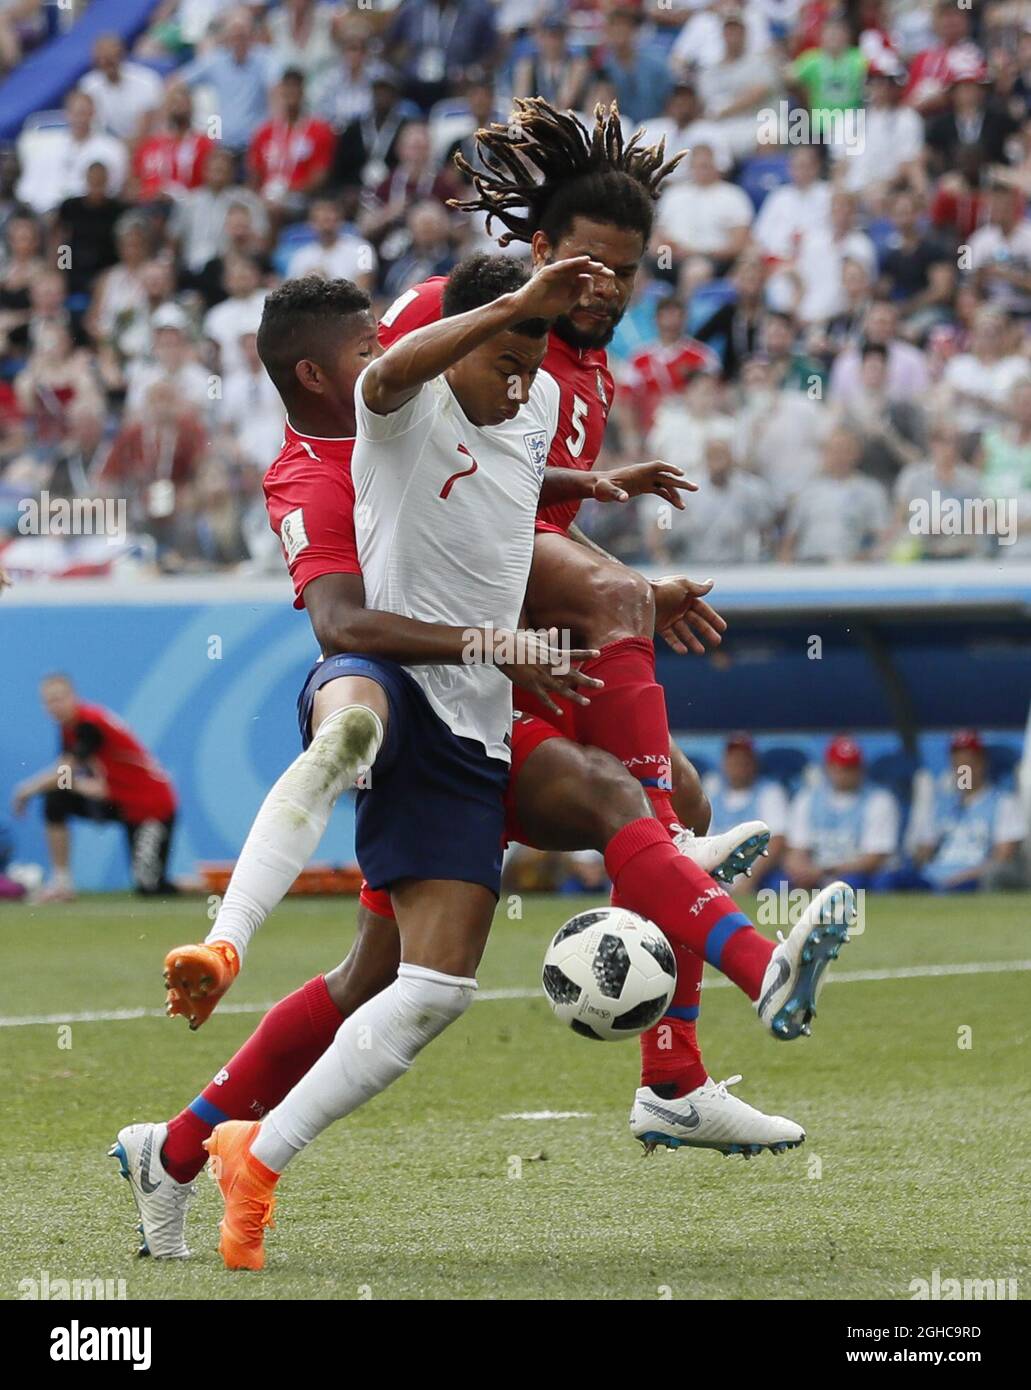 Jesse Lingard of England is brought down by Fidel Escobar of Panama to earn a penalty during the FIFA World Cup 2018 Group G match at the Nizhny Novgorod Stadium, Nizhny Novgorod. Picture date 24th June 2018. Picture credit should read: David Klein/Sportimage via PA Images Stock Photo